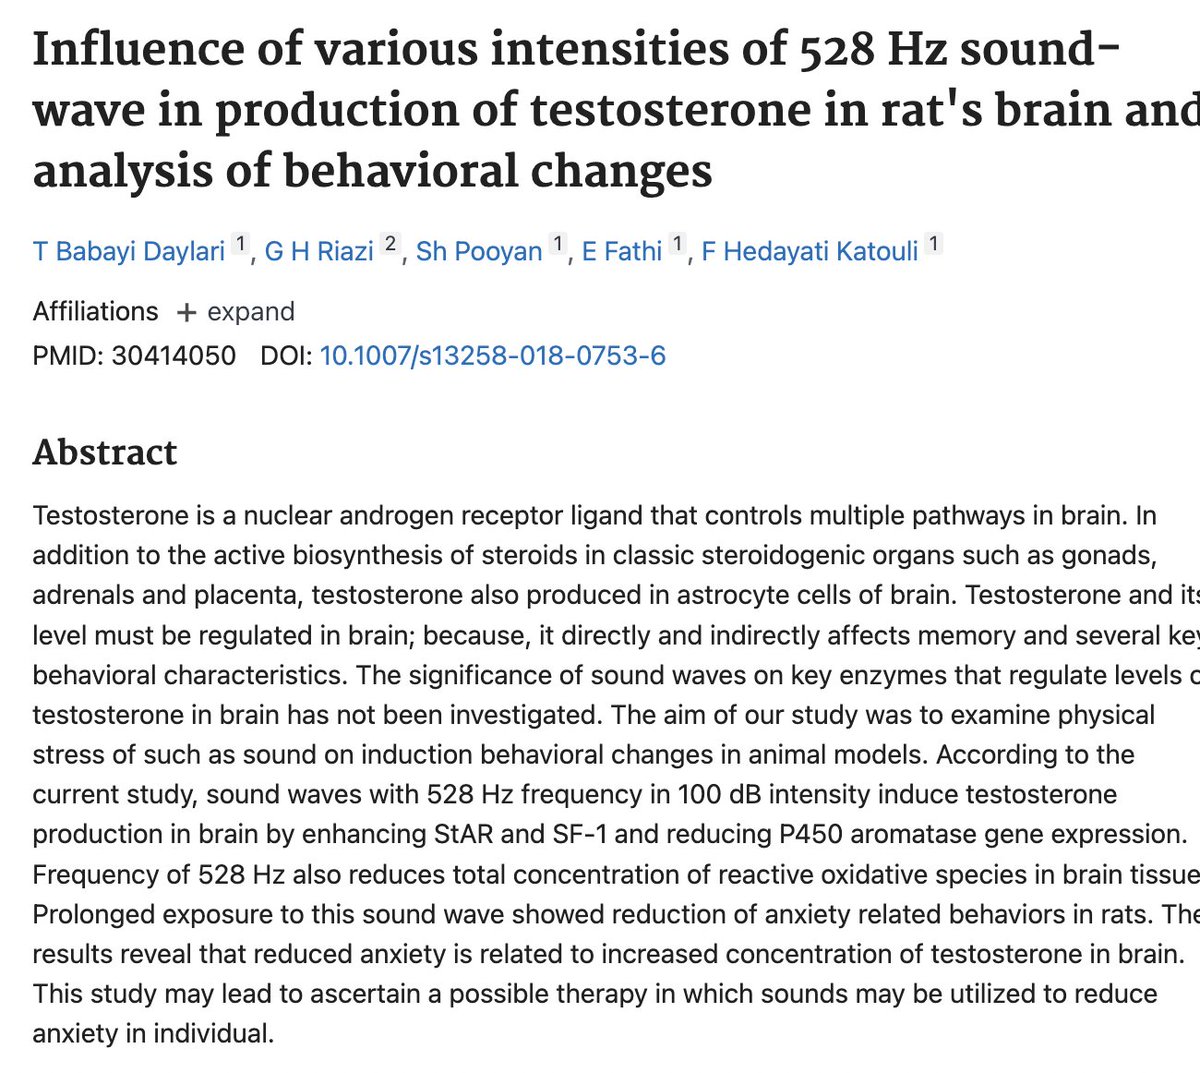 Just 5 minutes of listening to 528hz music significantly reduces stress Other studies show that 528hz boosts testosterone production and lowers reactive oxygen species in the brain Sound is an incredibly potent way to change your health